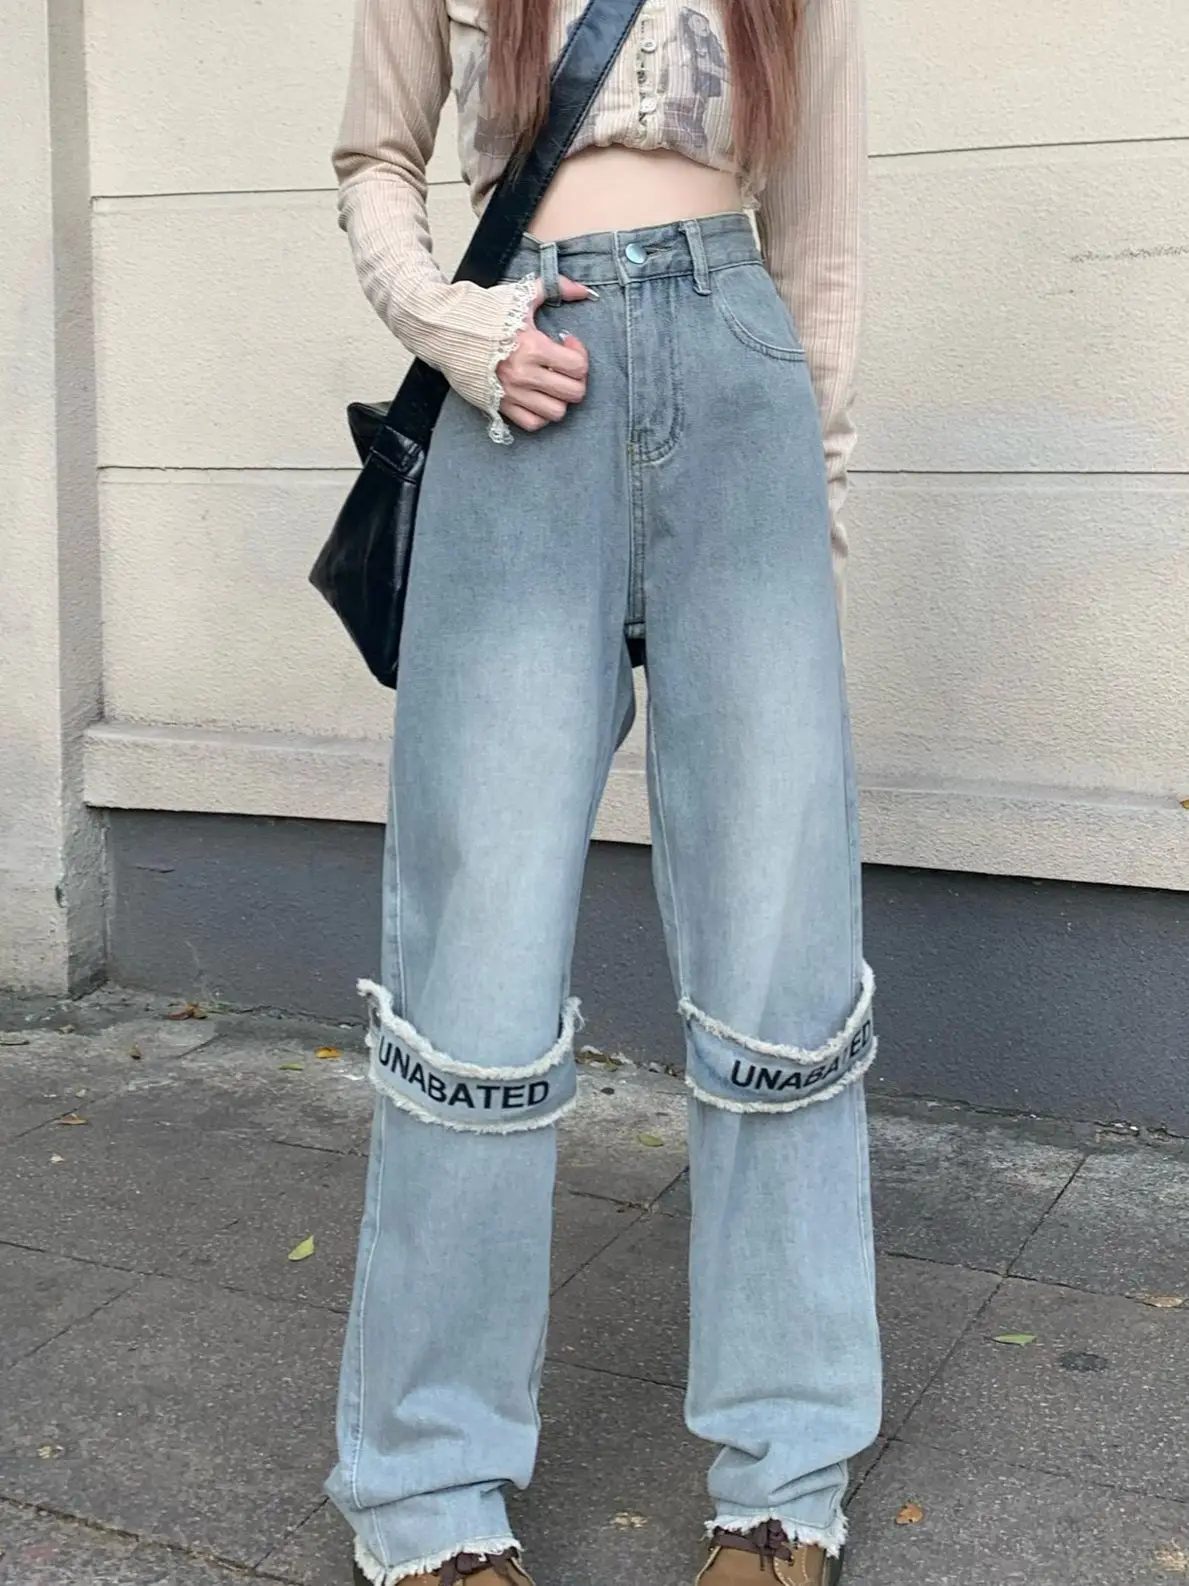 Jeans Women All-match Korean Style Mopping Trousers Denim Vintage High Street Solid High Waist Autumn Baggy Chic Street Casual